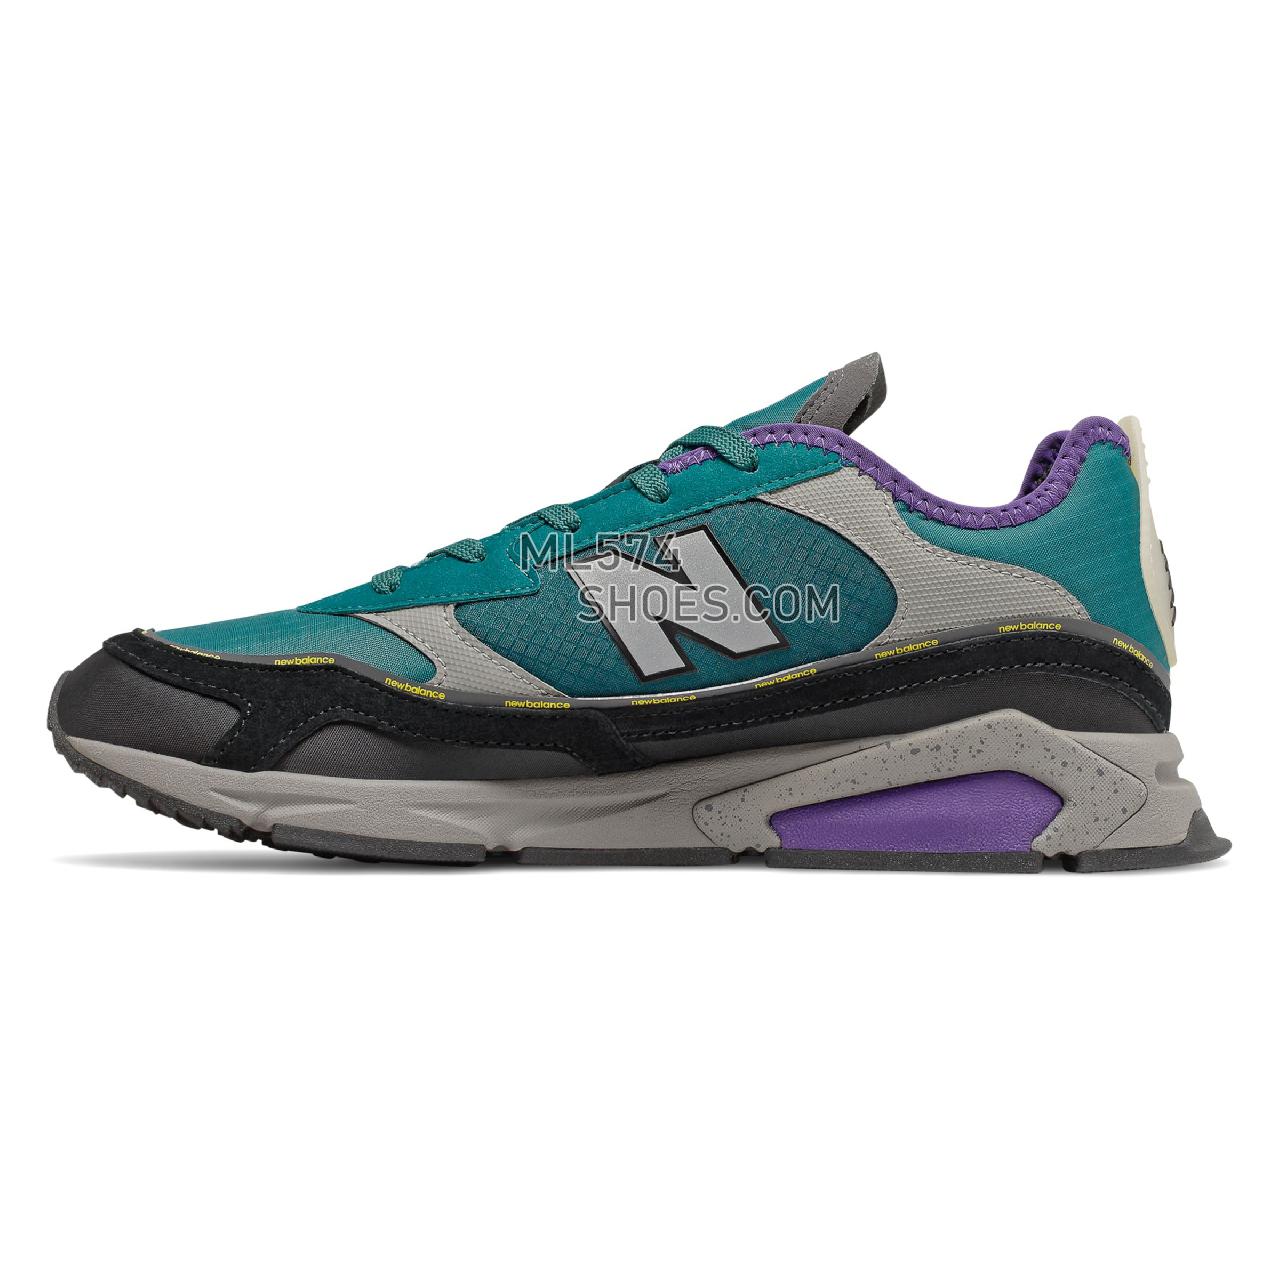 New Balance X-Racer - Men's Sport Style Sneakers - Team Teal with Black and Prism Purple - MSXRCHSC